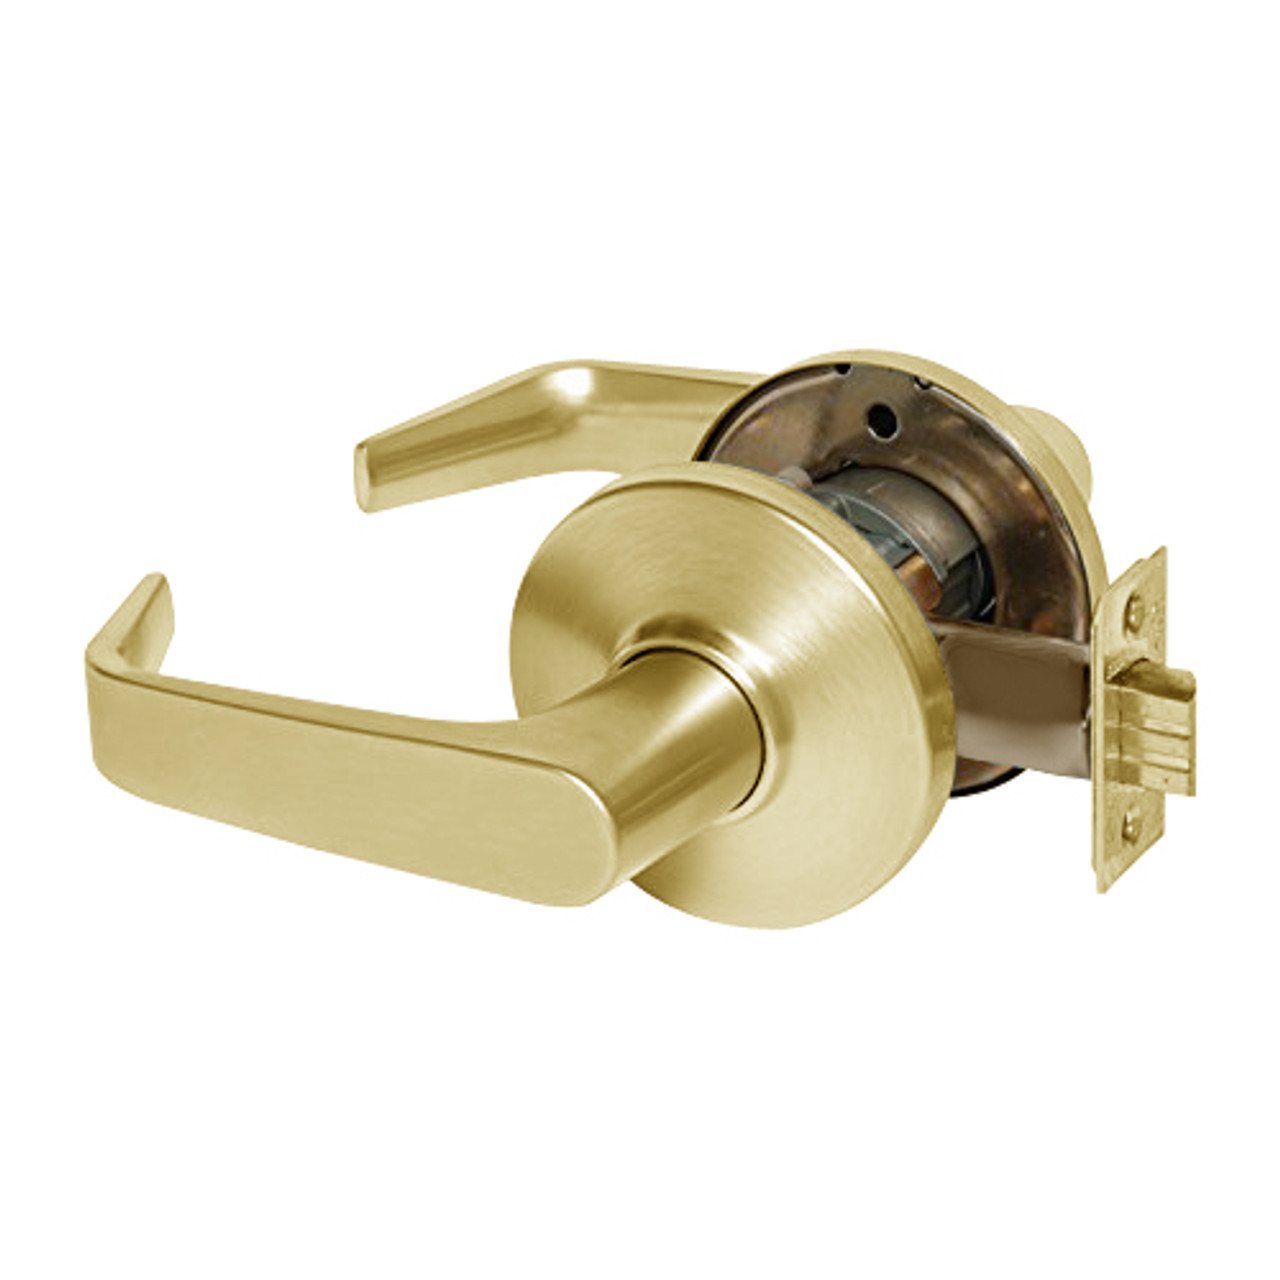 9K30NX15DSTK605LM Best 9K Series Passage Heavy Duty Cylindrical Lever Locks with Contour Angle with Return Lever Design in Bright Brass